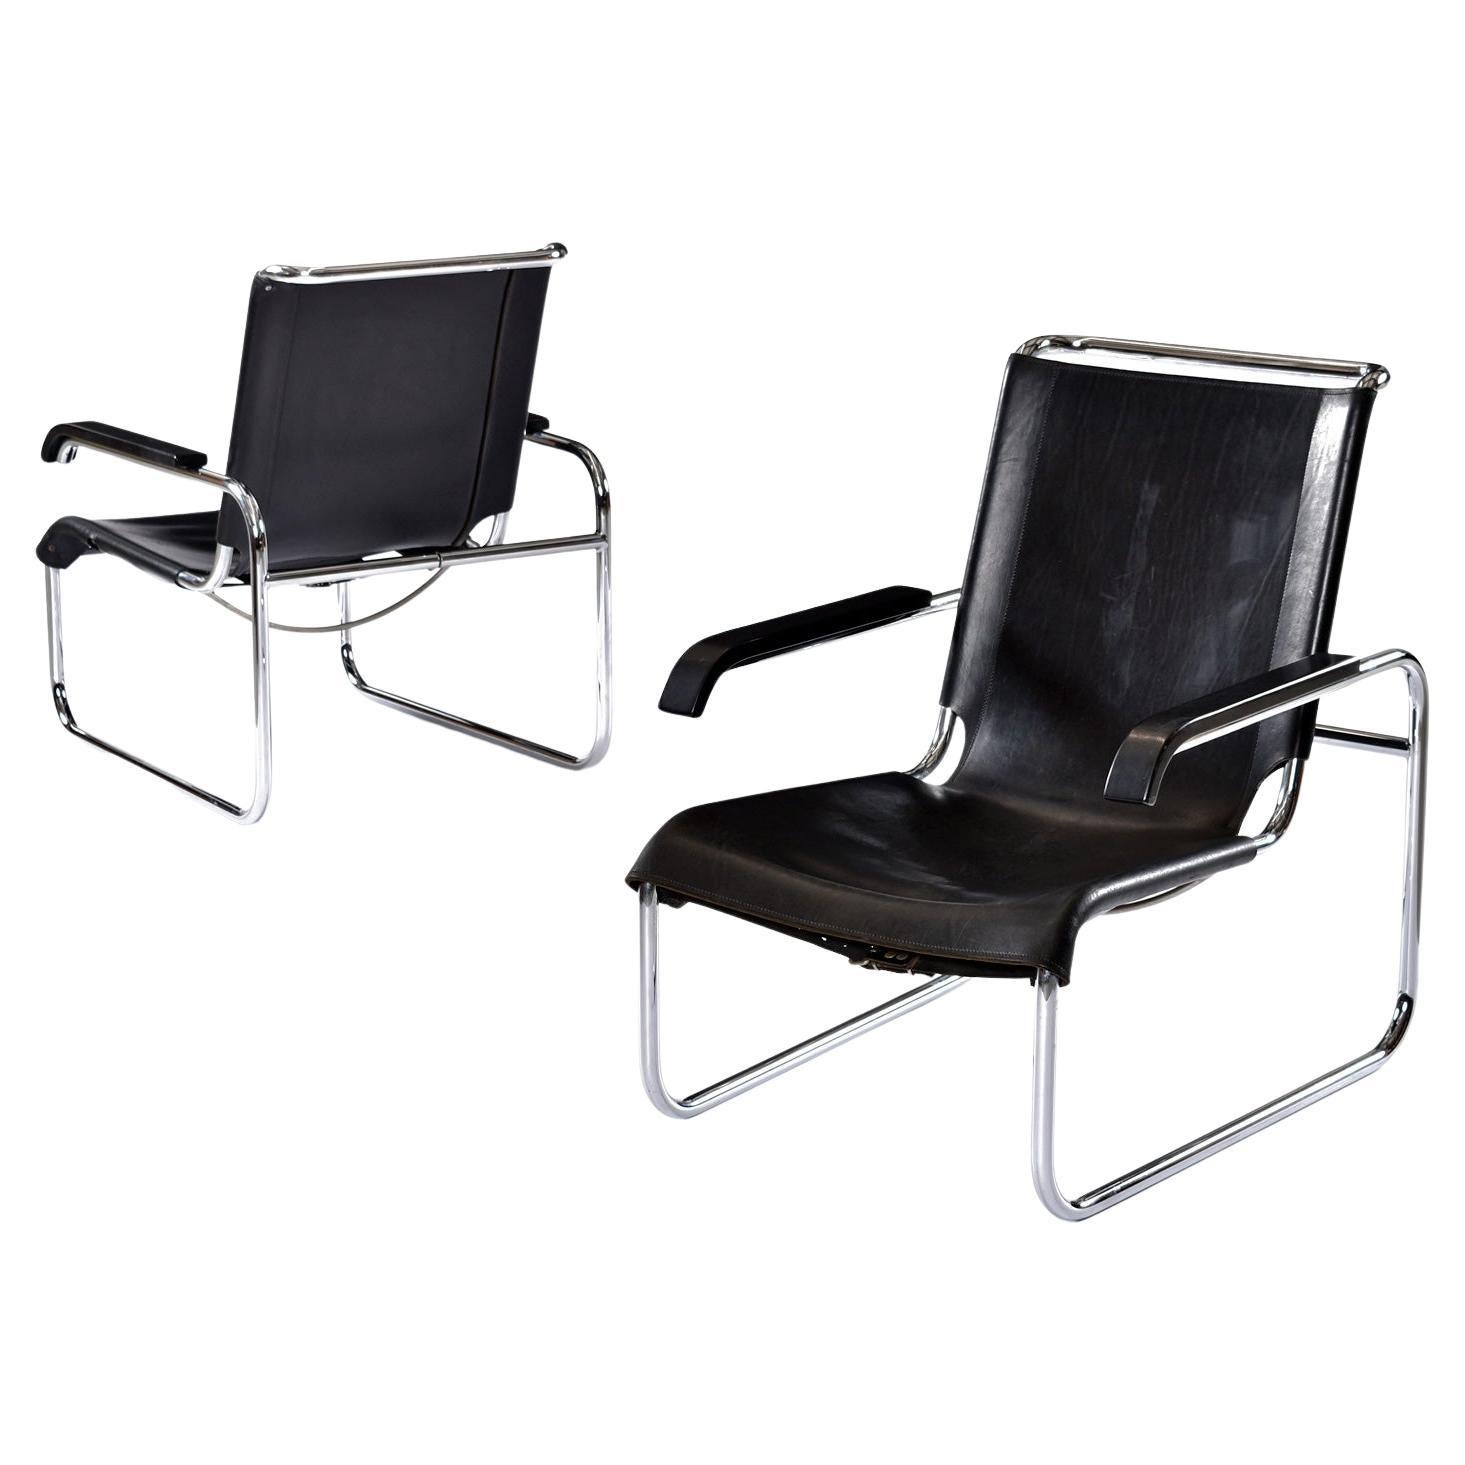 Bauhaus Marcel Breuer For Thonet B35 Cantilever Leather Sling Lounge Chairs Set of 2 For Sale